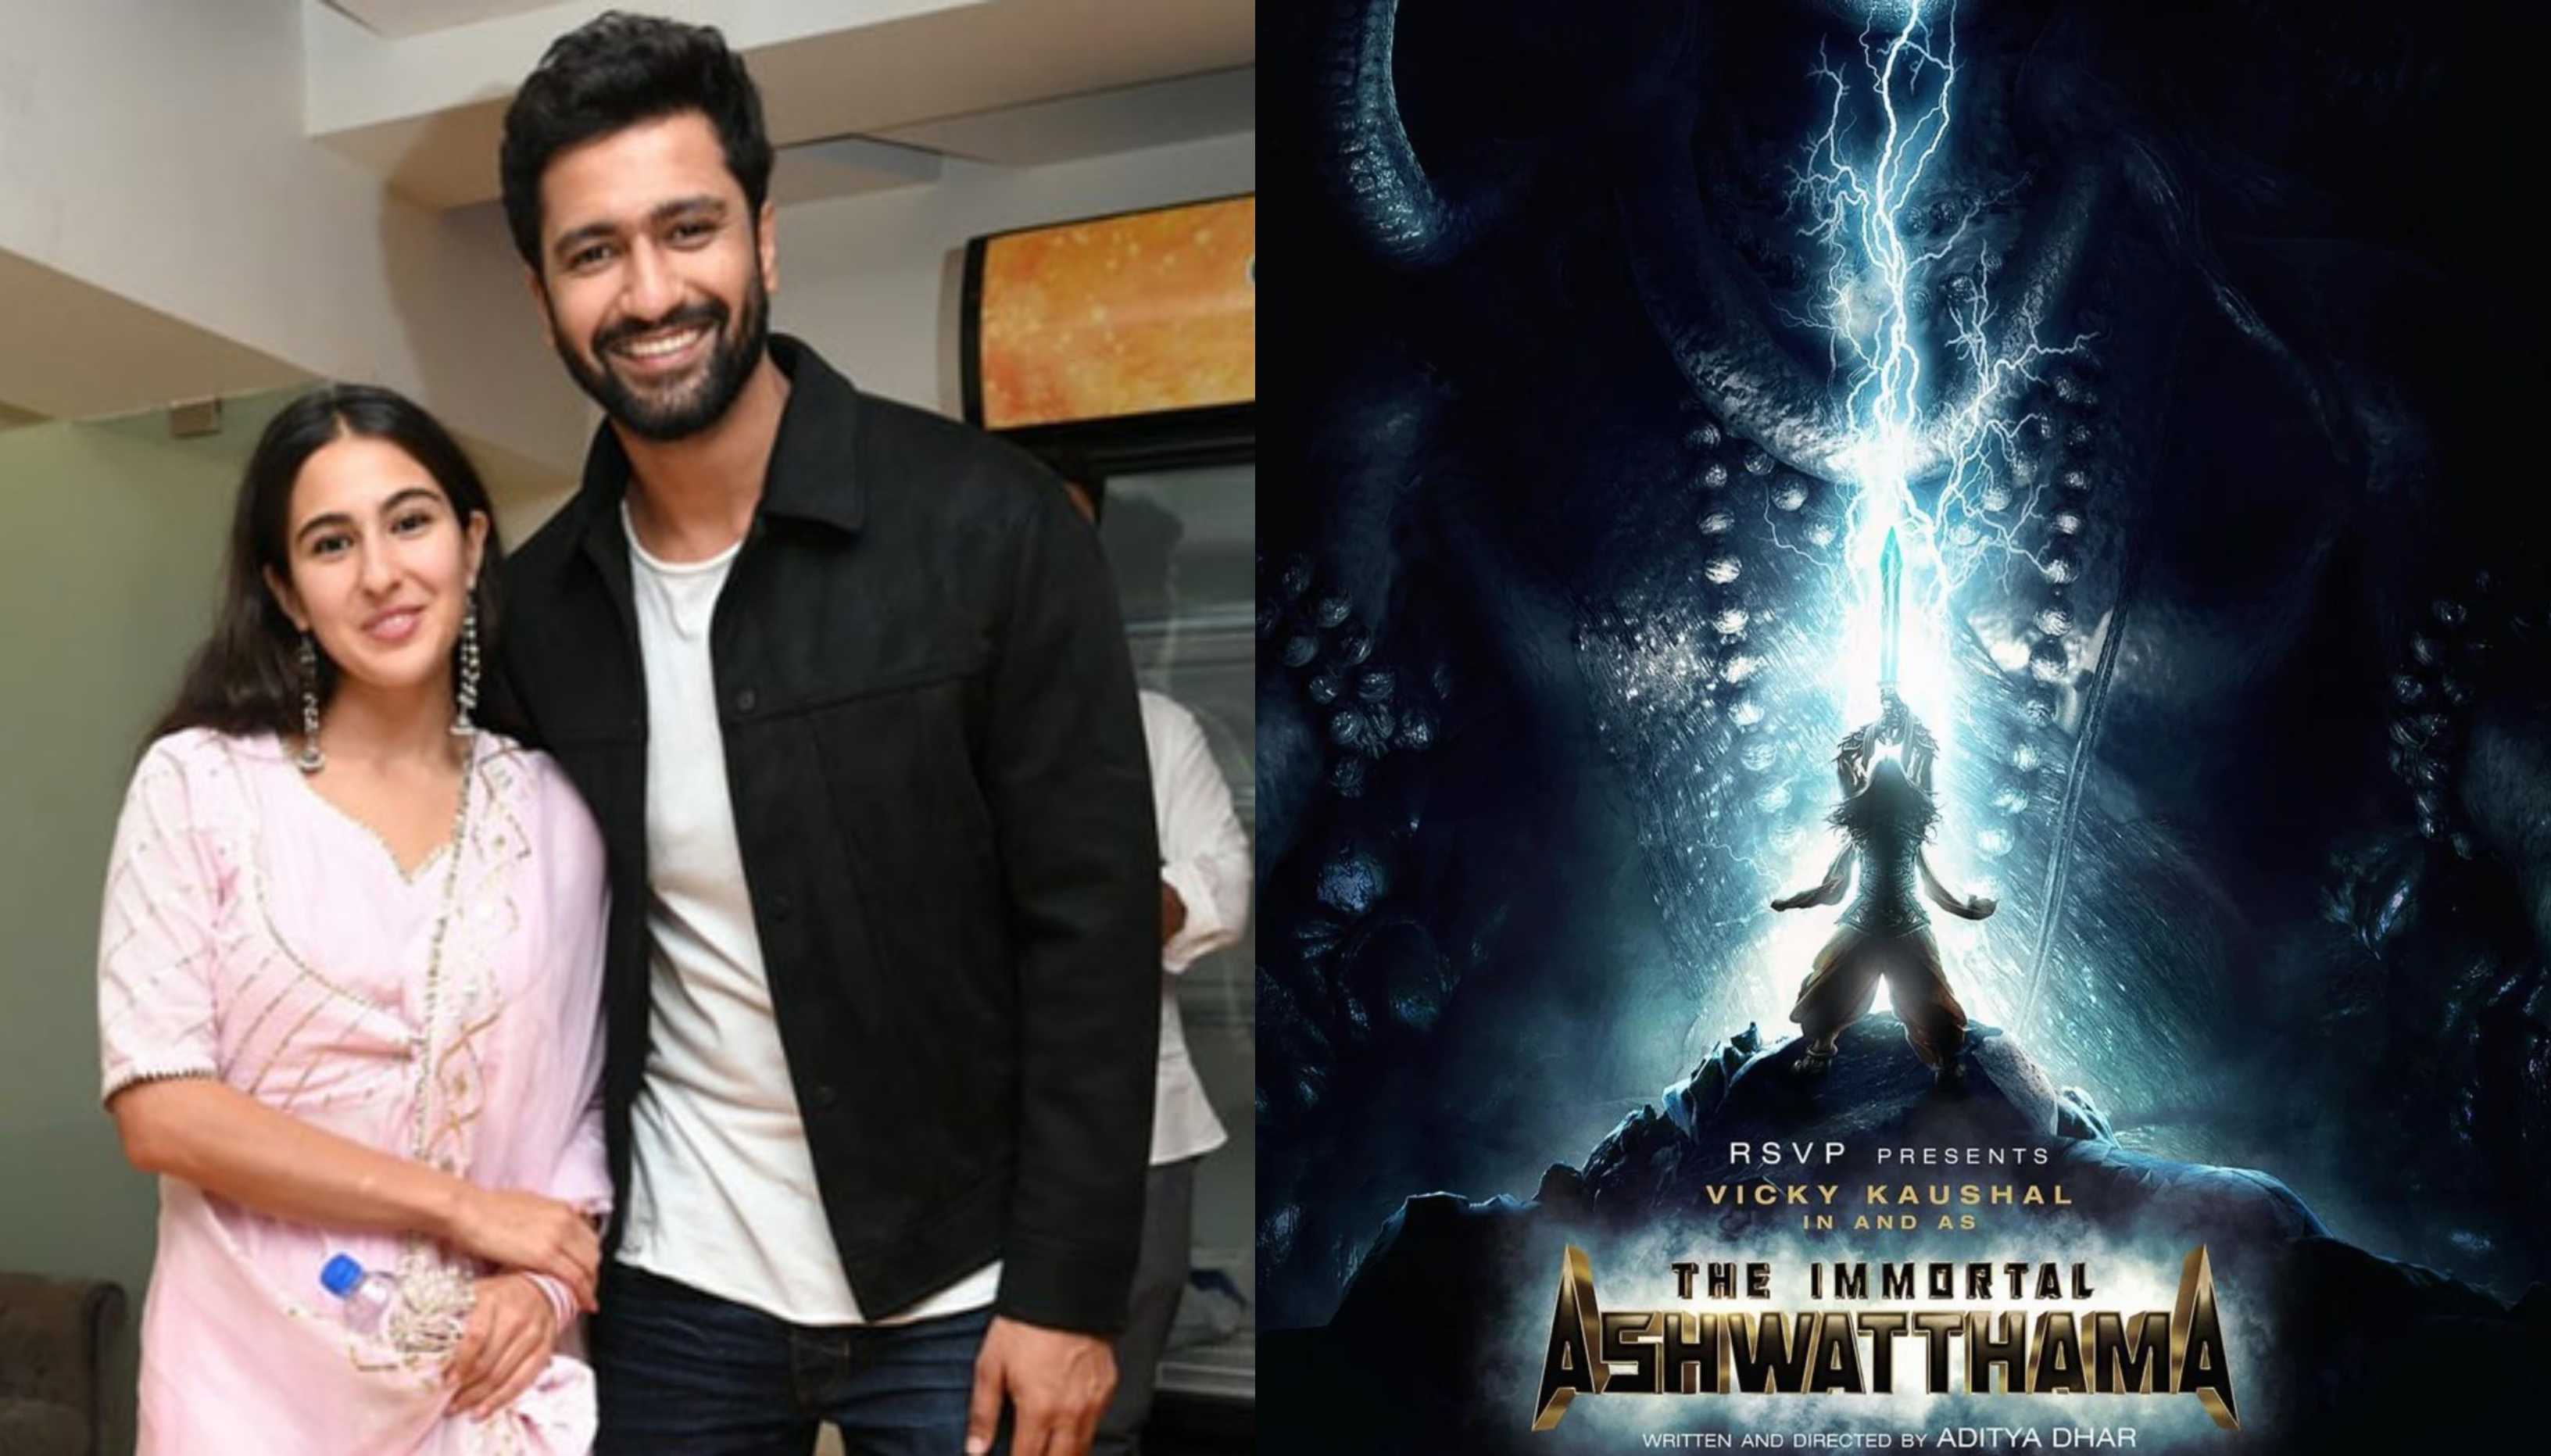 After Sara Ali Khan, Vicky Kaushal to be chucked from The Immortal Ashwatthama?